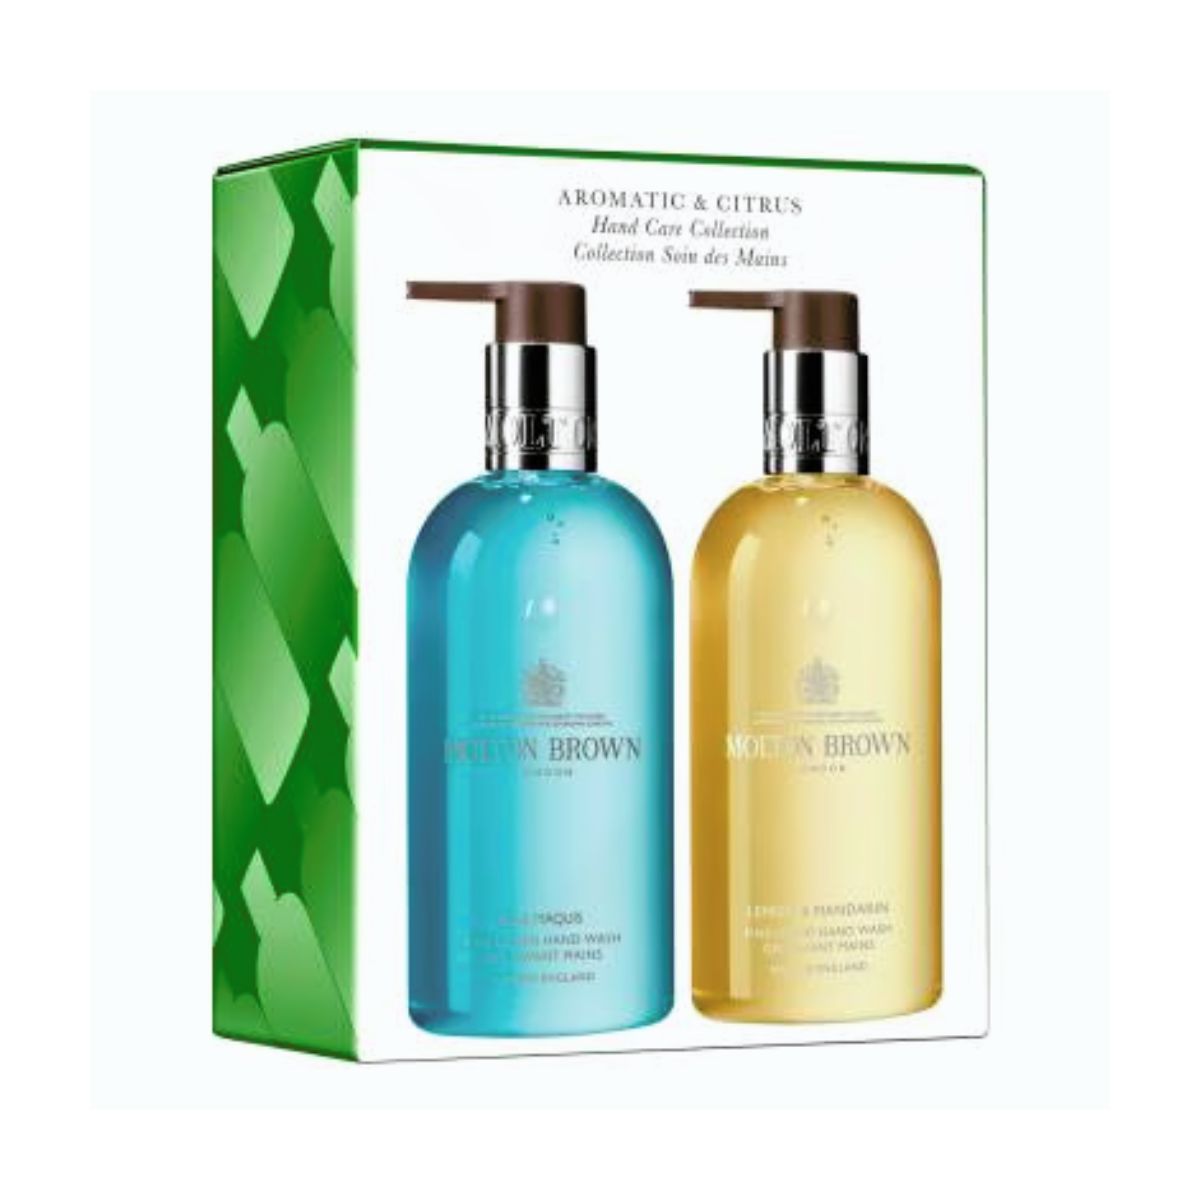 Molton Brown Aromatic & Citrus Hand Care Collection SAVE 32%